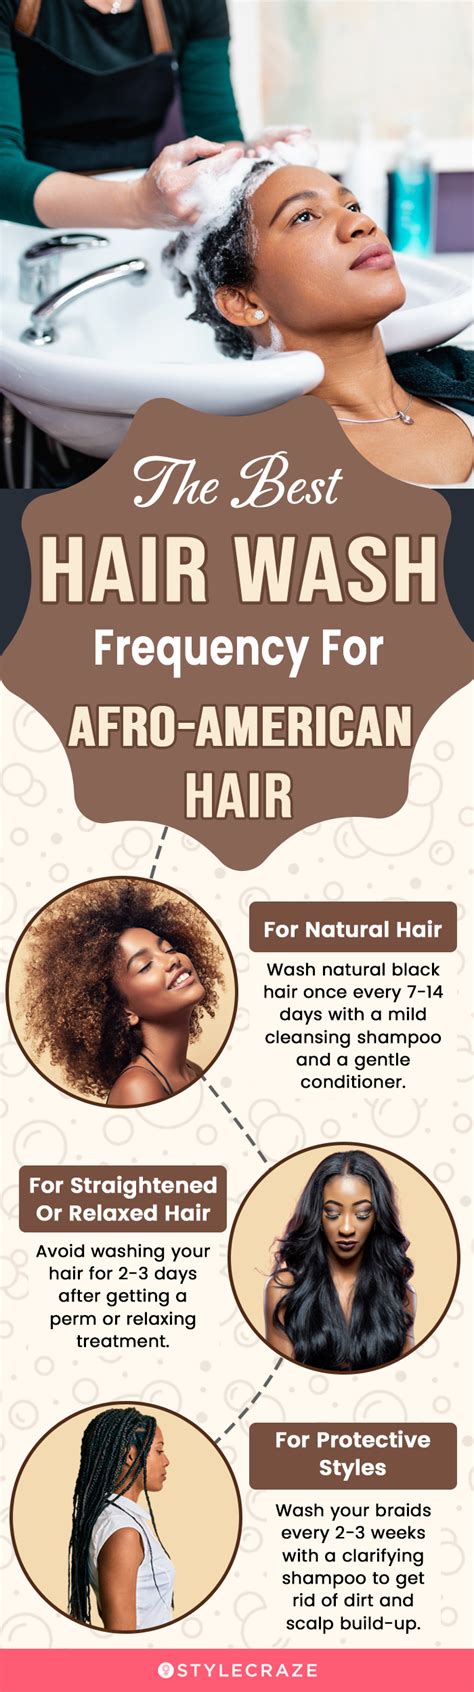 How often should you wash afro hair?